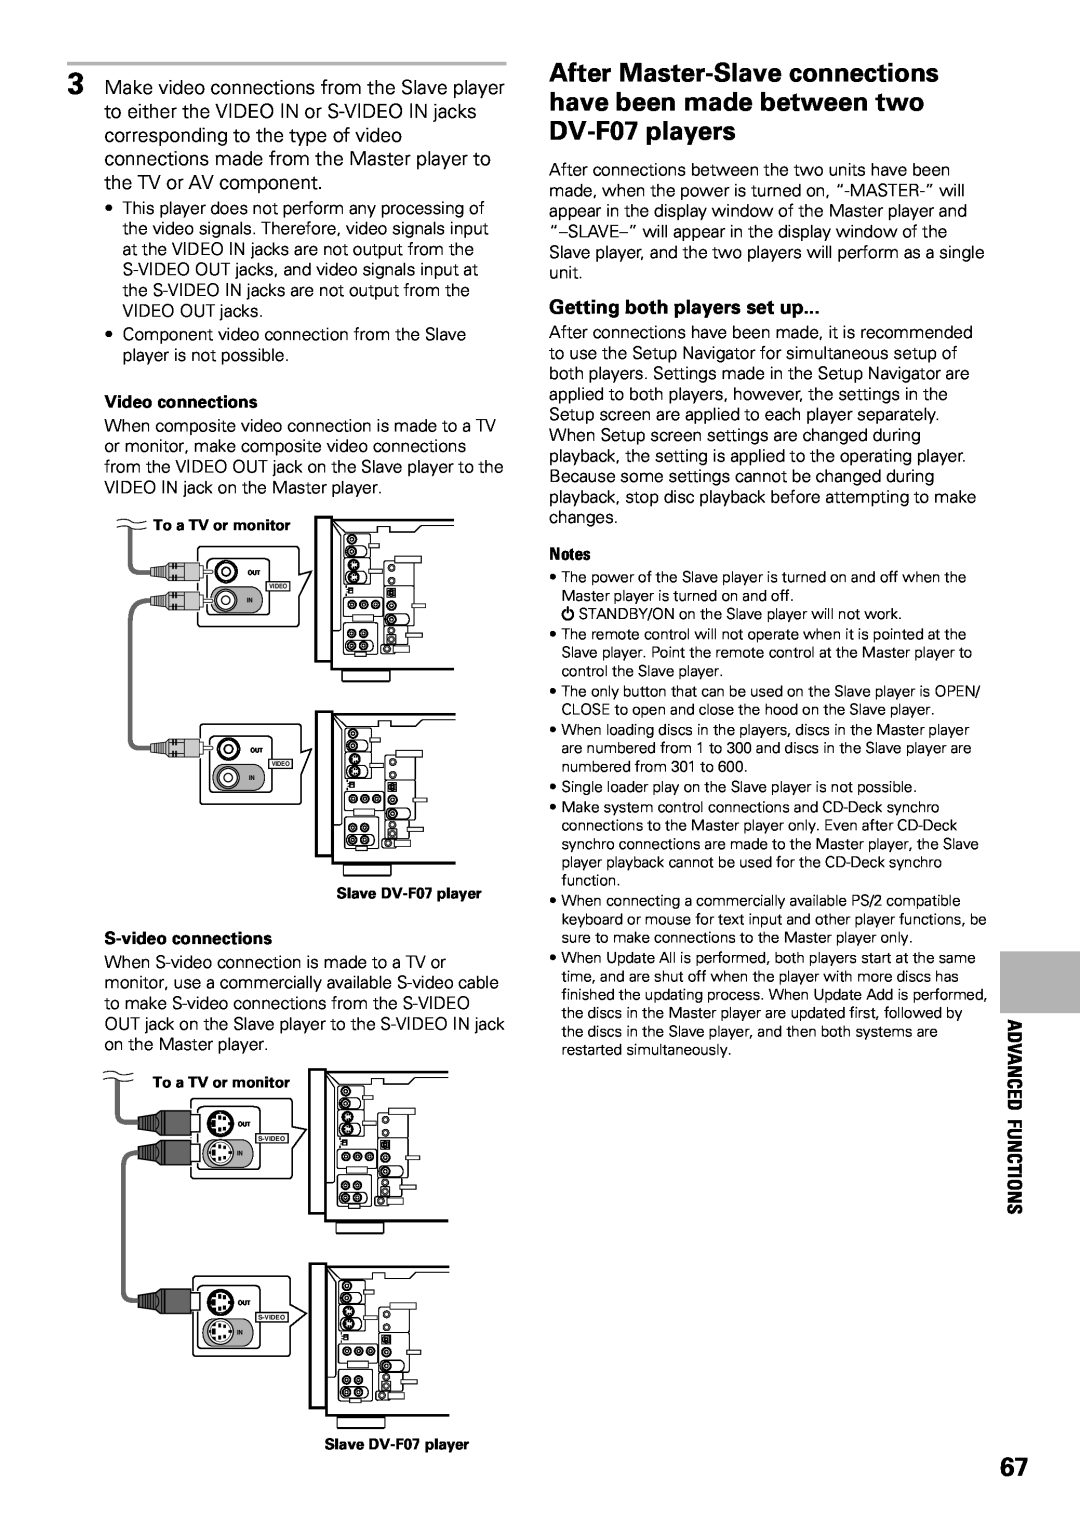 Pioneer DV-F07 operating instructions Getting both players set up, Functions, Video connections, S-video connections 